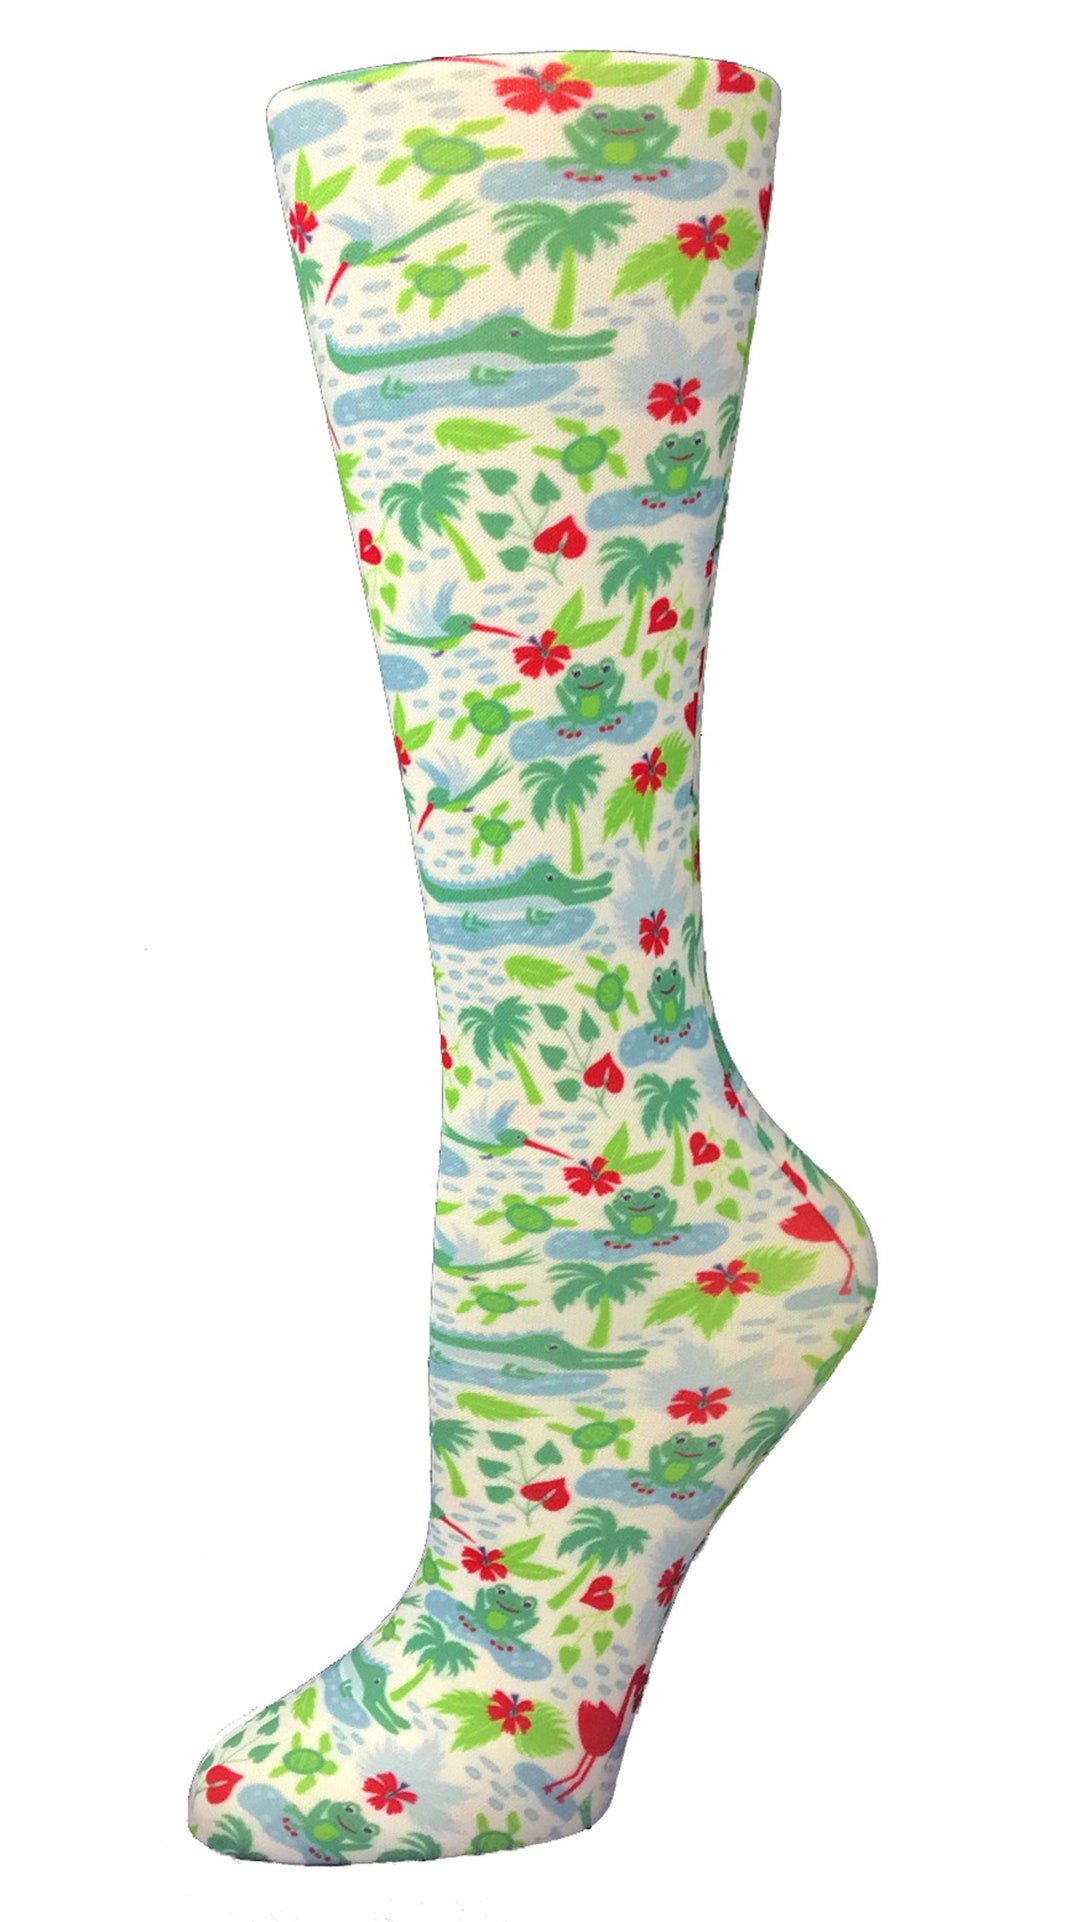 Cutieful Therapeutic Compression Socks Oasis - Etsy